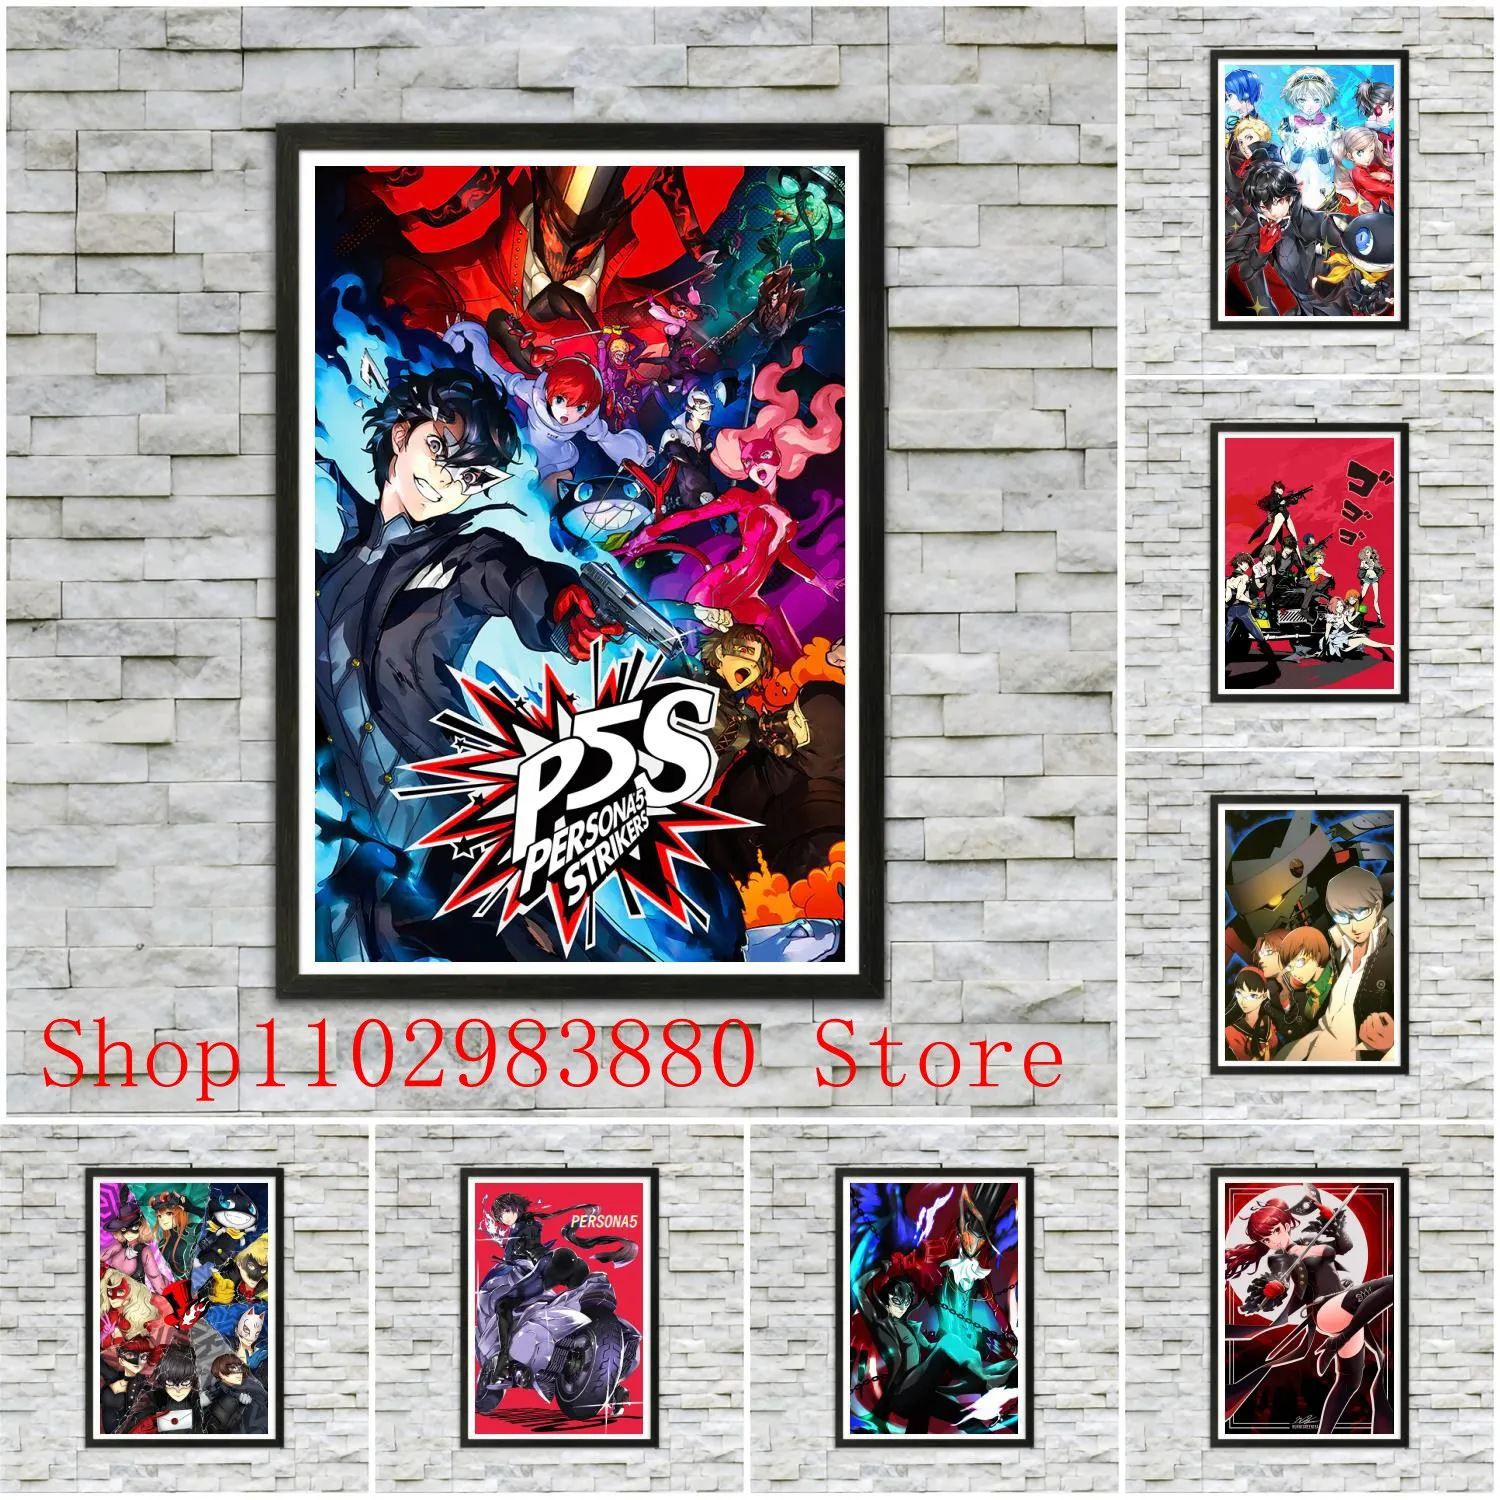 

Persona 5 Royal Anime Poster Canvas Painting Posters and Prints Wall Art Picture Home Living Room Decor